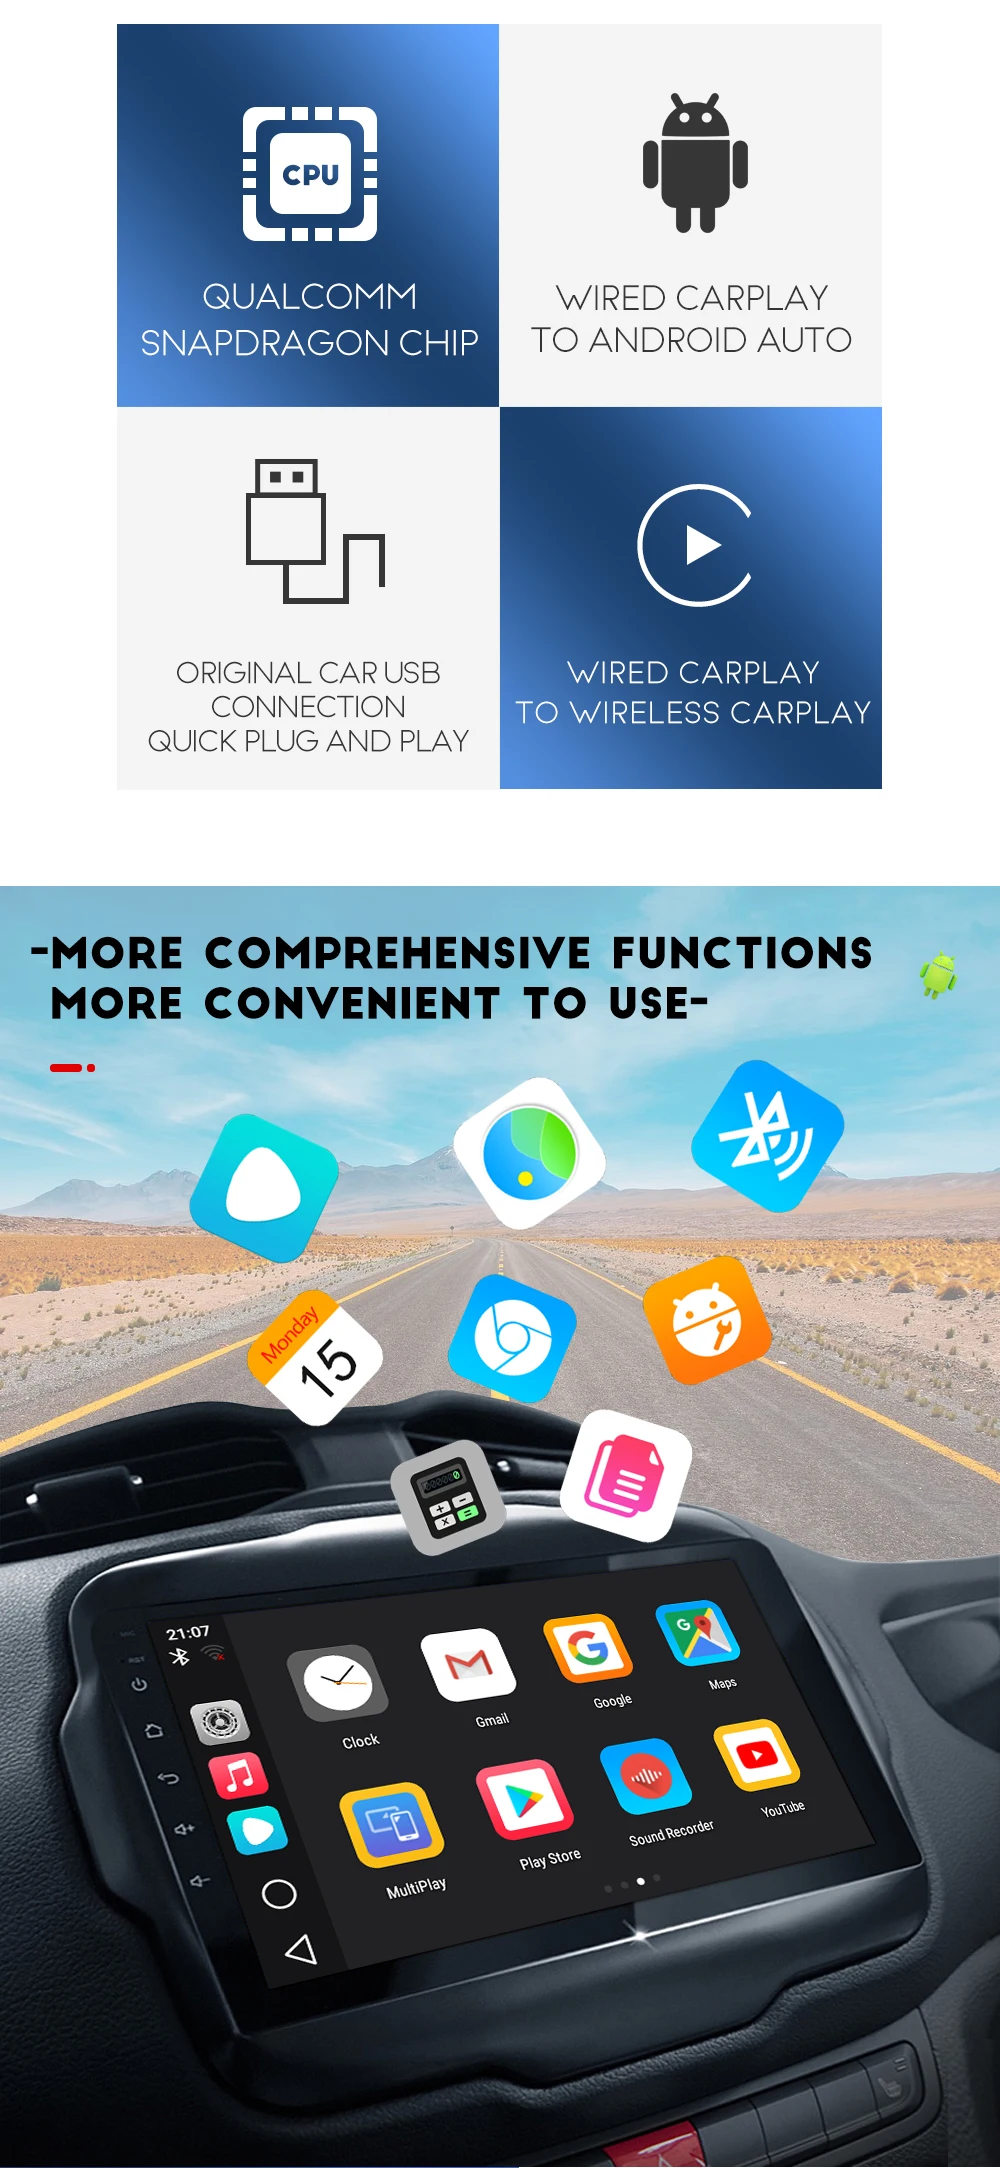 sony car stereo Qualcomm Snapdragon Android 10 Wireless Carplay Android Auto Ai Box Car Intelligent System For Volkswagen Netflix Android Box car stereo cd player